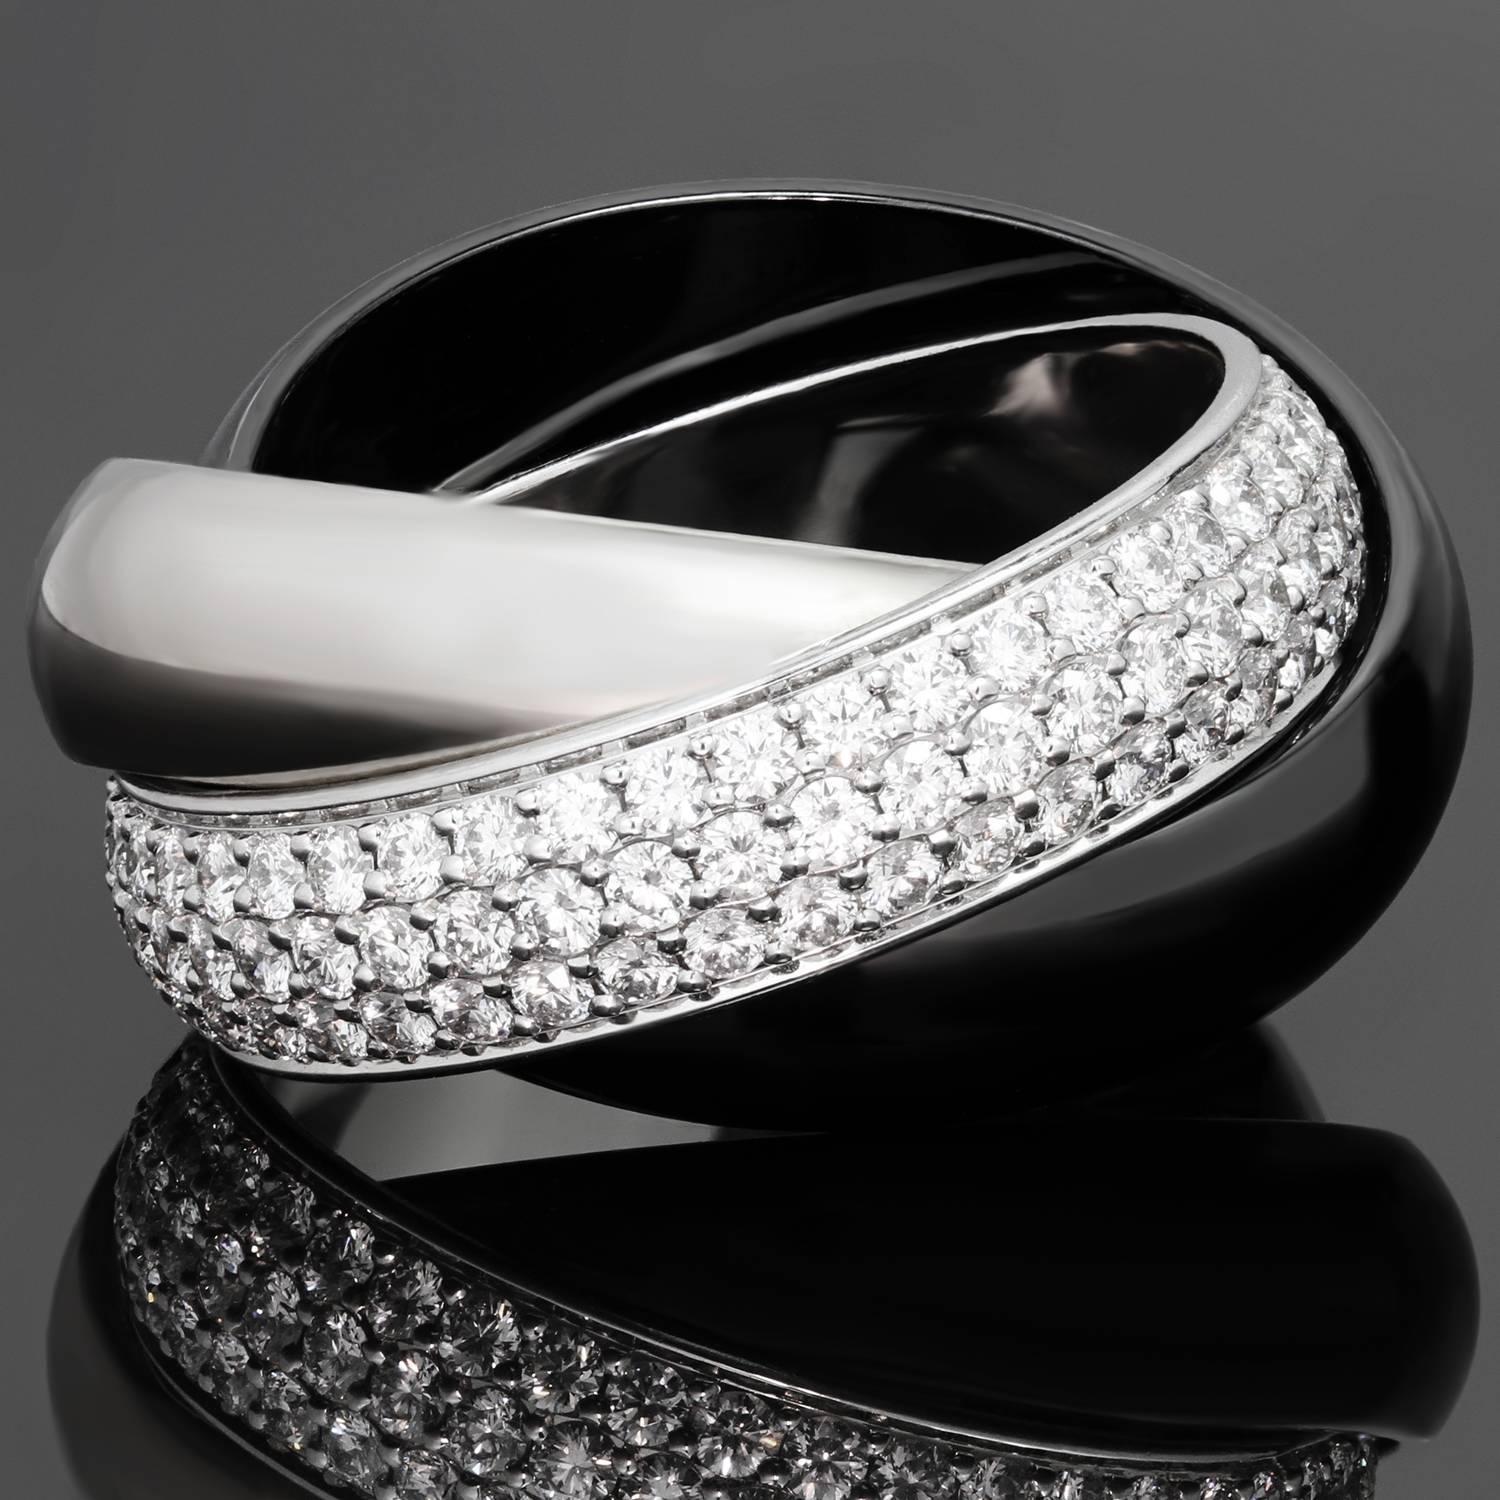 This fabulous ring from the Trinity de Cartier collection features 3 interconnected bands, crafted in 18k white gold and black ceramic and accented with about 129 round brilliant-cut diamonds of an estimated 1.54 carats. This is the large model of